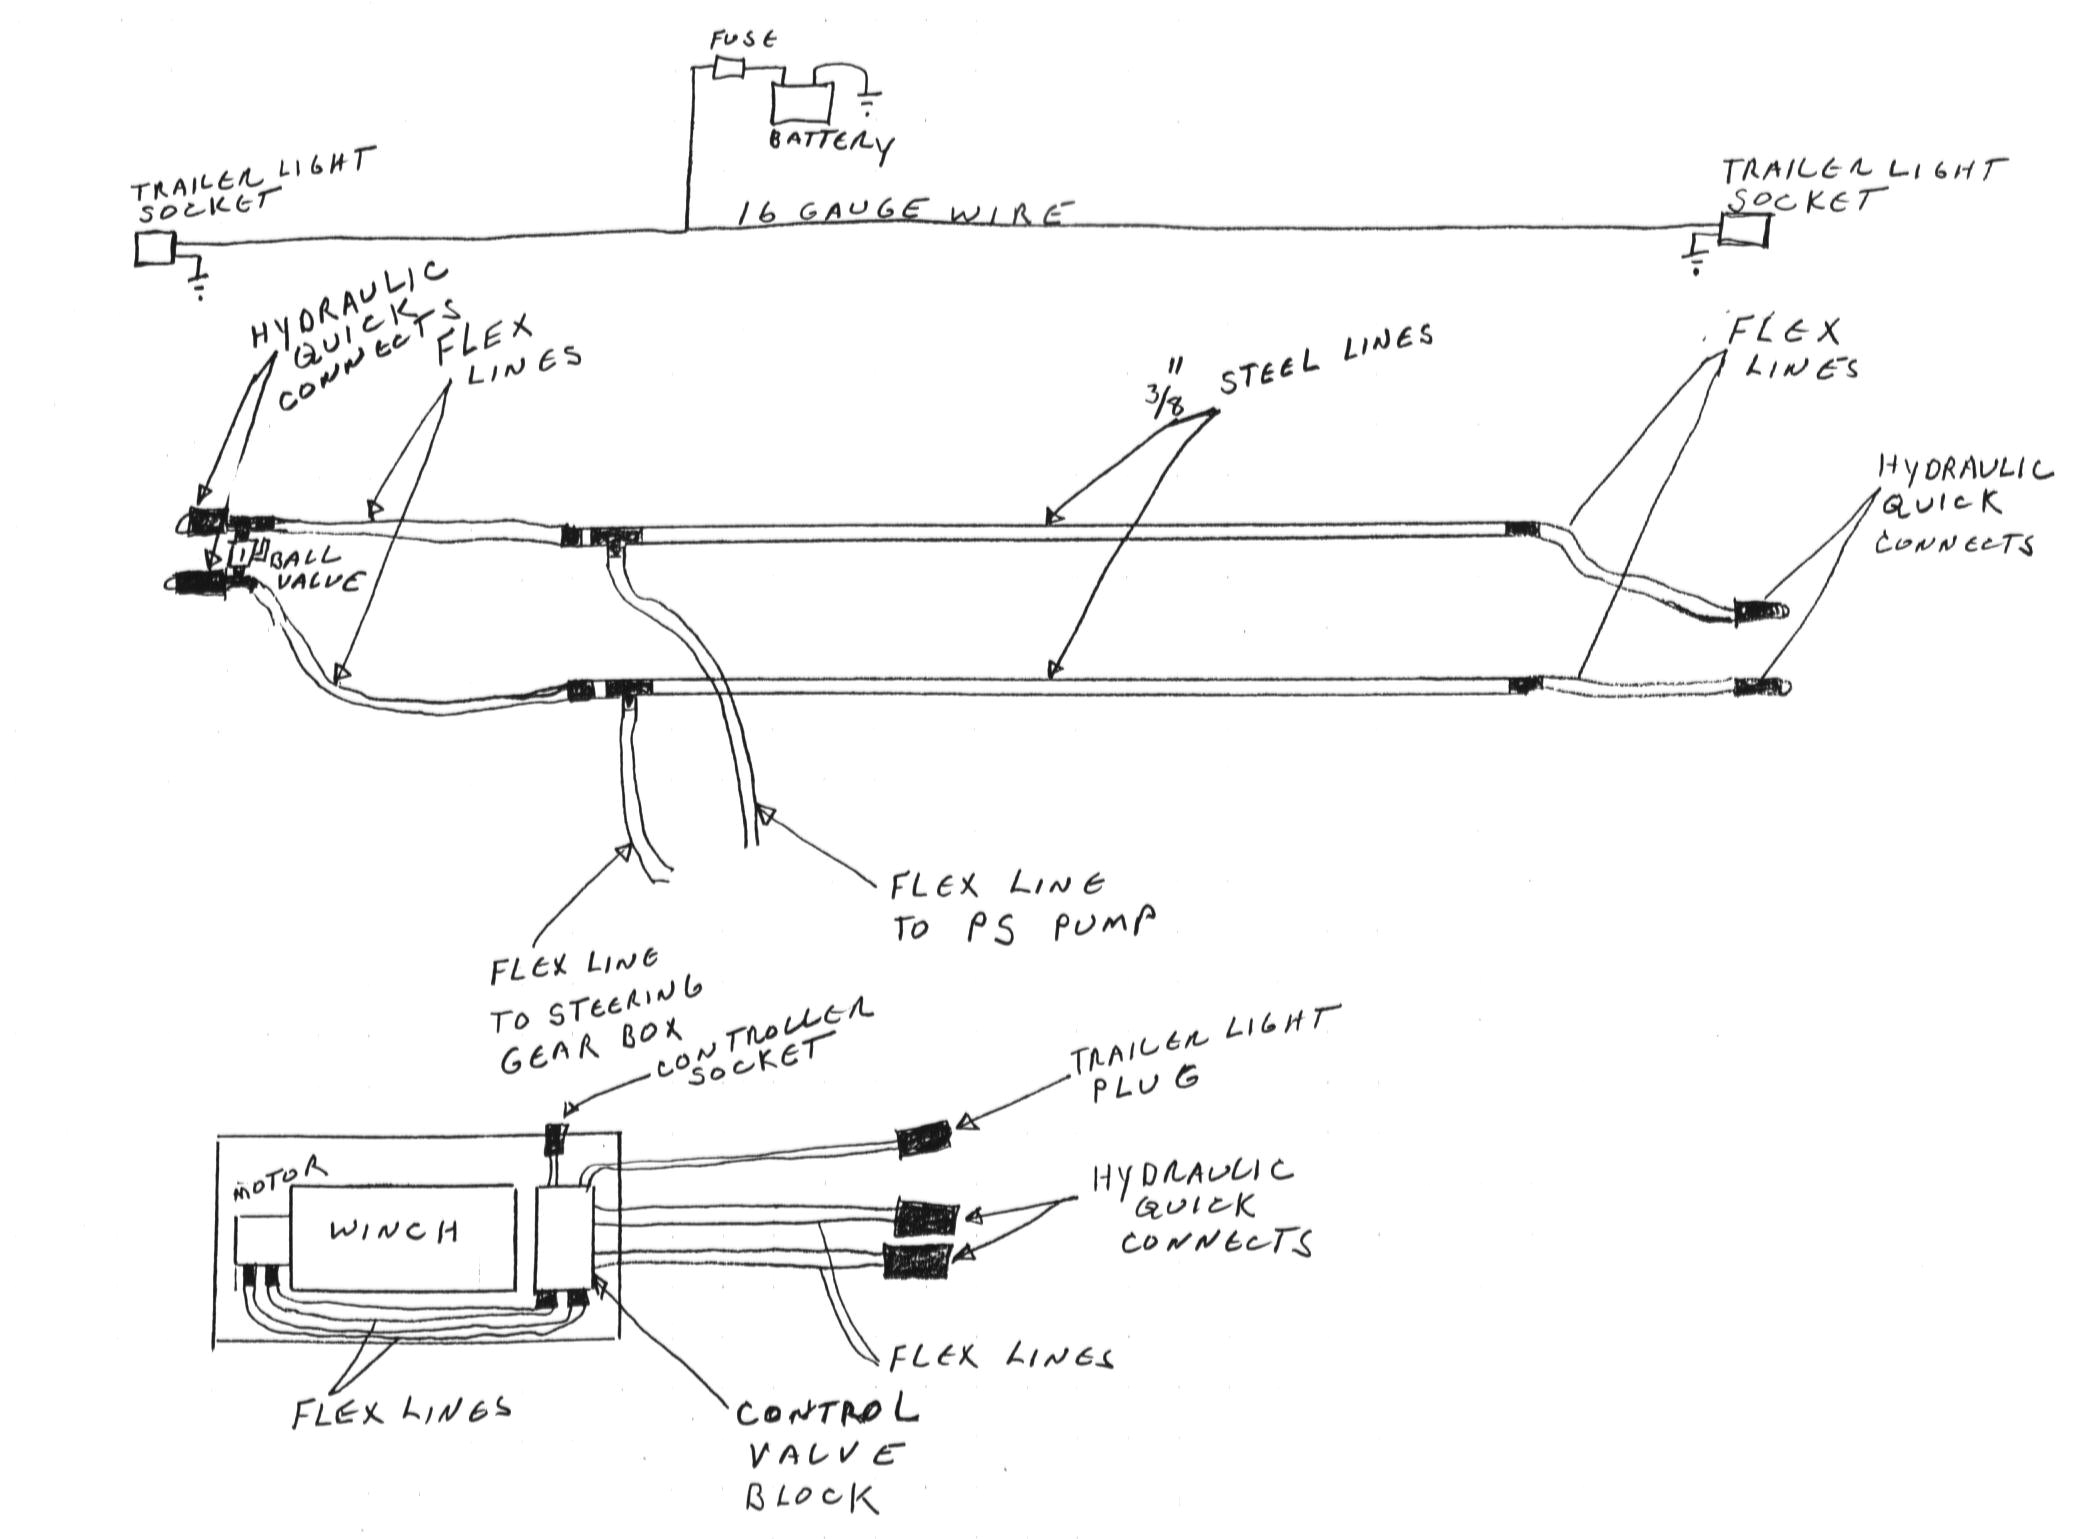 chicago electric winch remote control wiring diagram wiring 92860 chicago electric winch wiring diagram